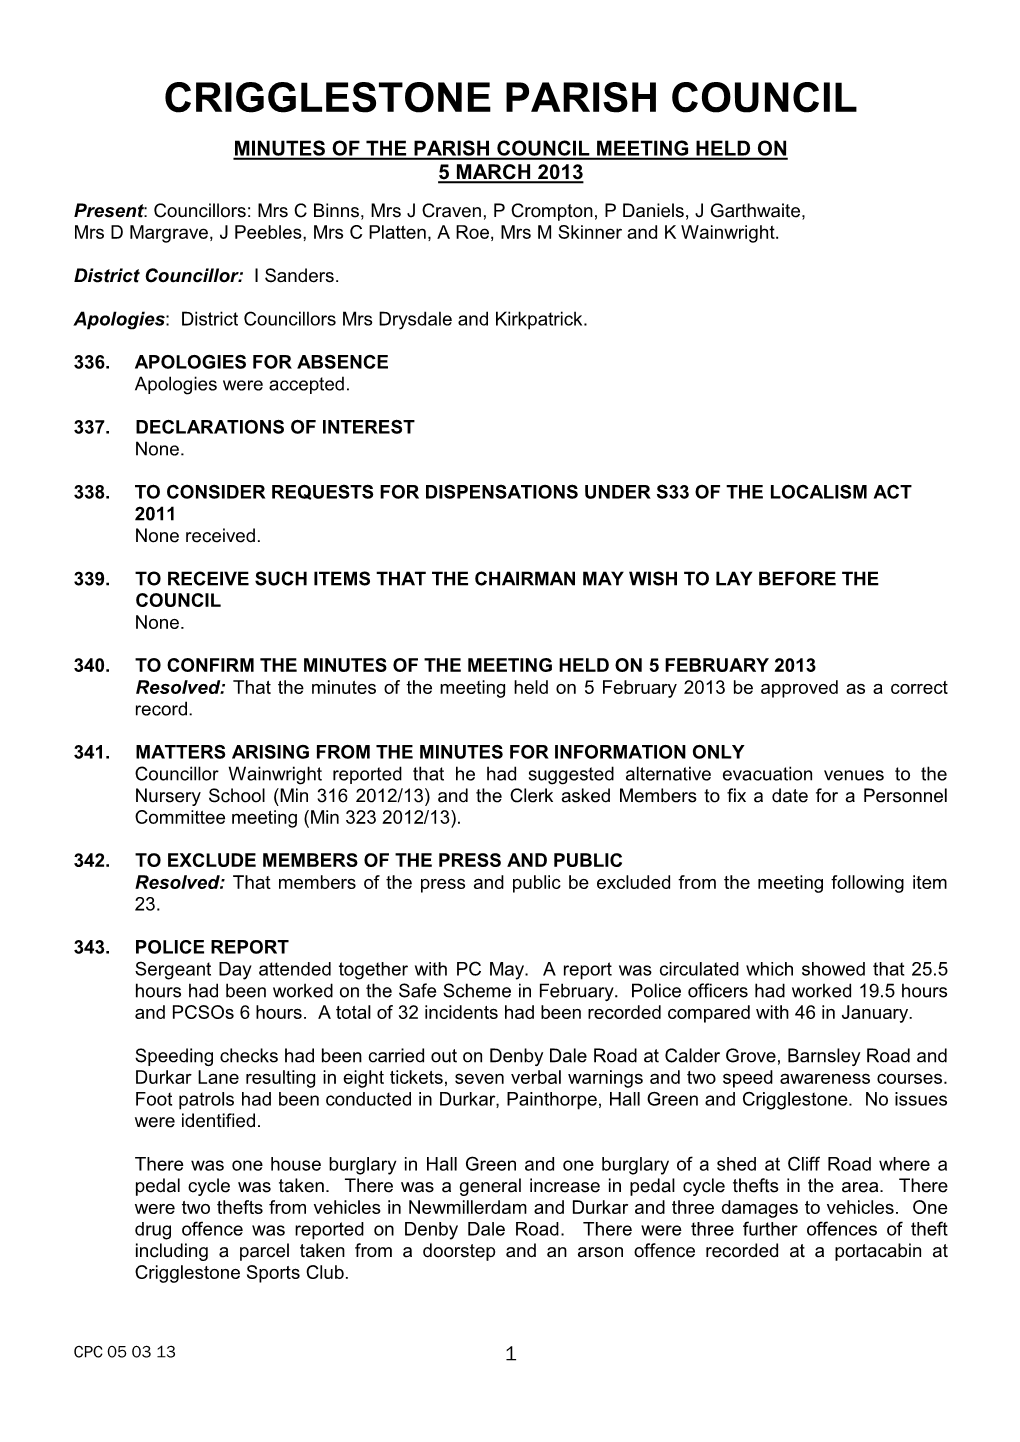 Minutes of the Council Meeting 5 March 2013